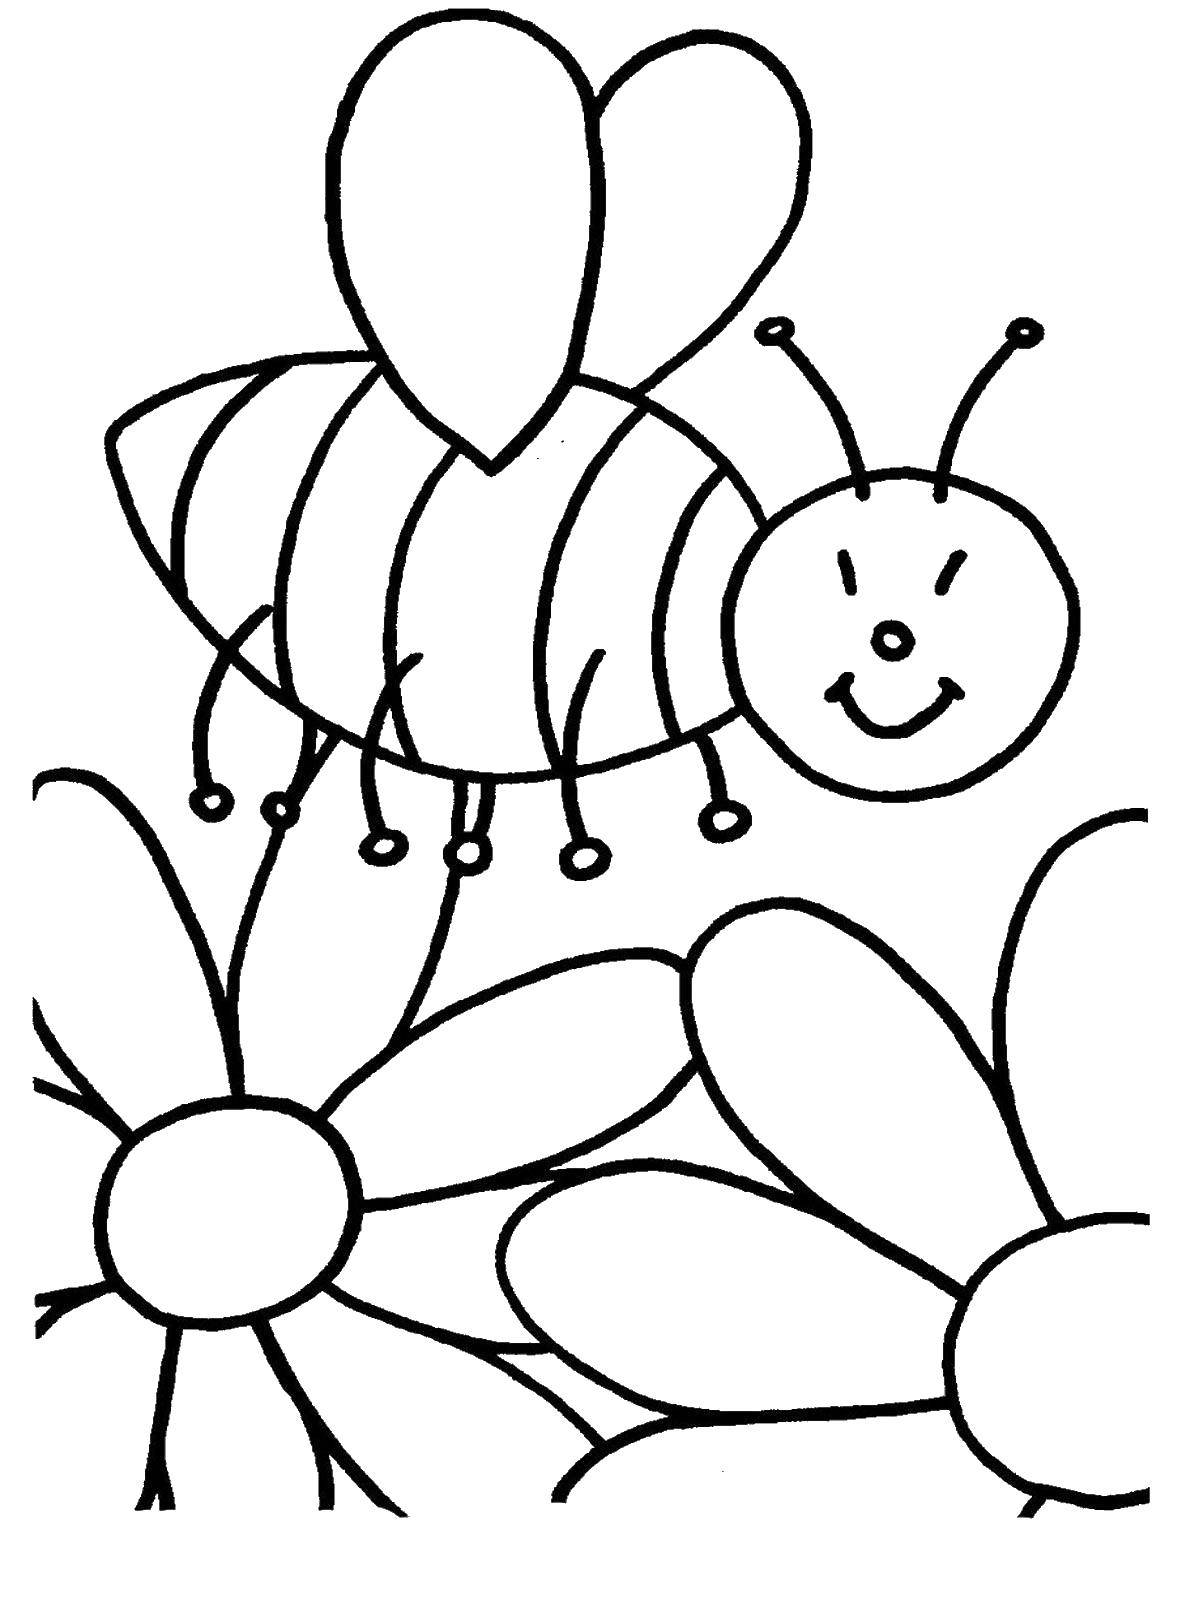 Coloring Happy bee. Category coloring for little ones. Tags:  Insects, bee.